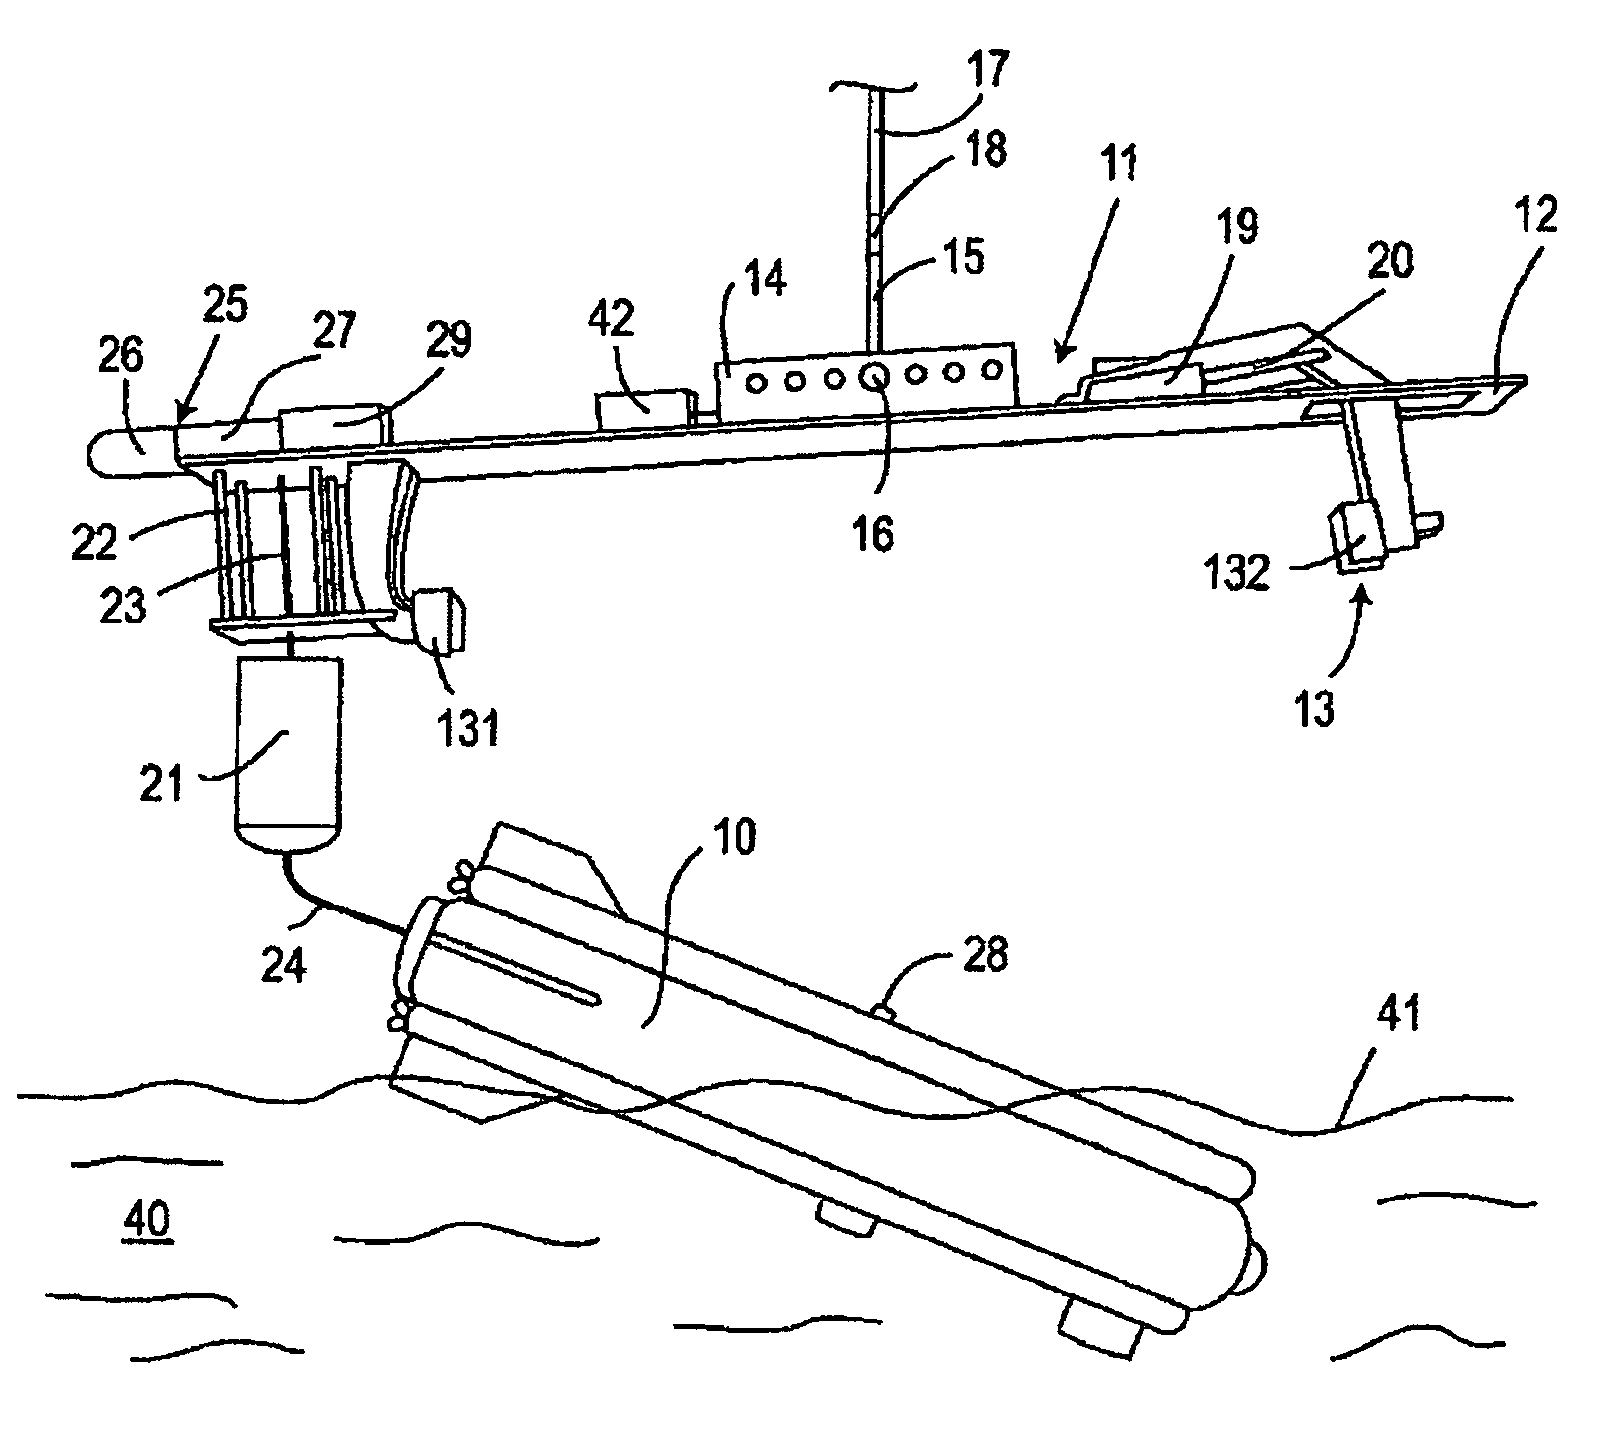 Appliance for deployment and tracking of an unmanned underwater vehicle